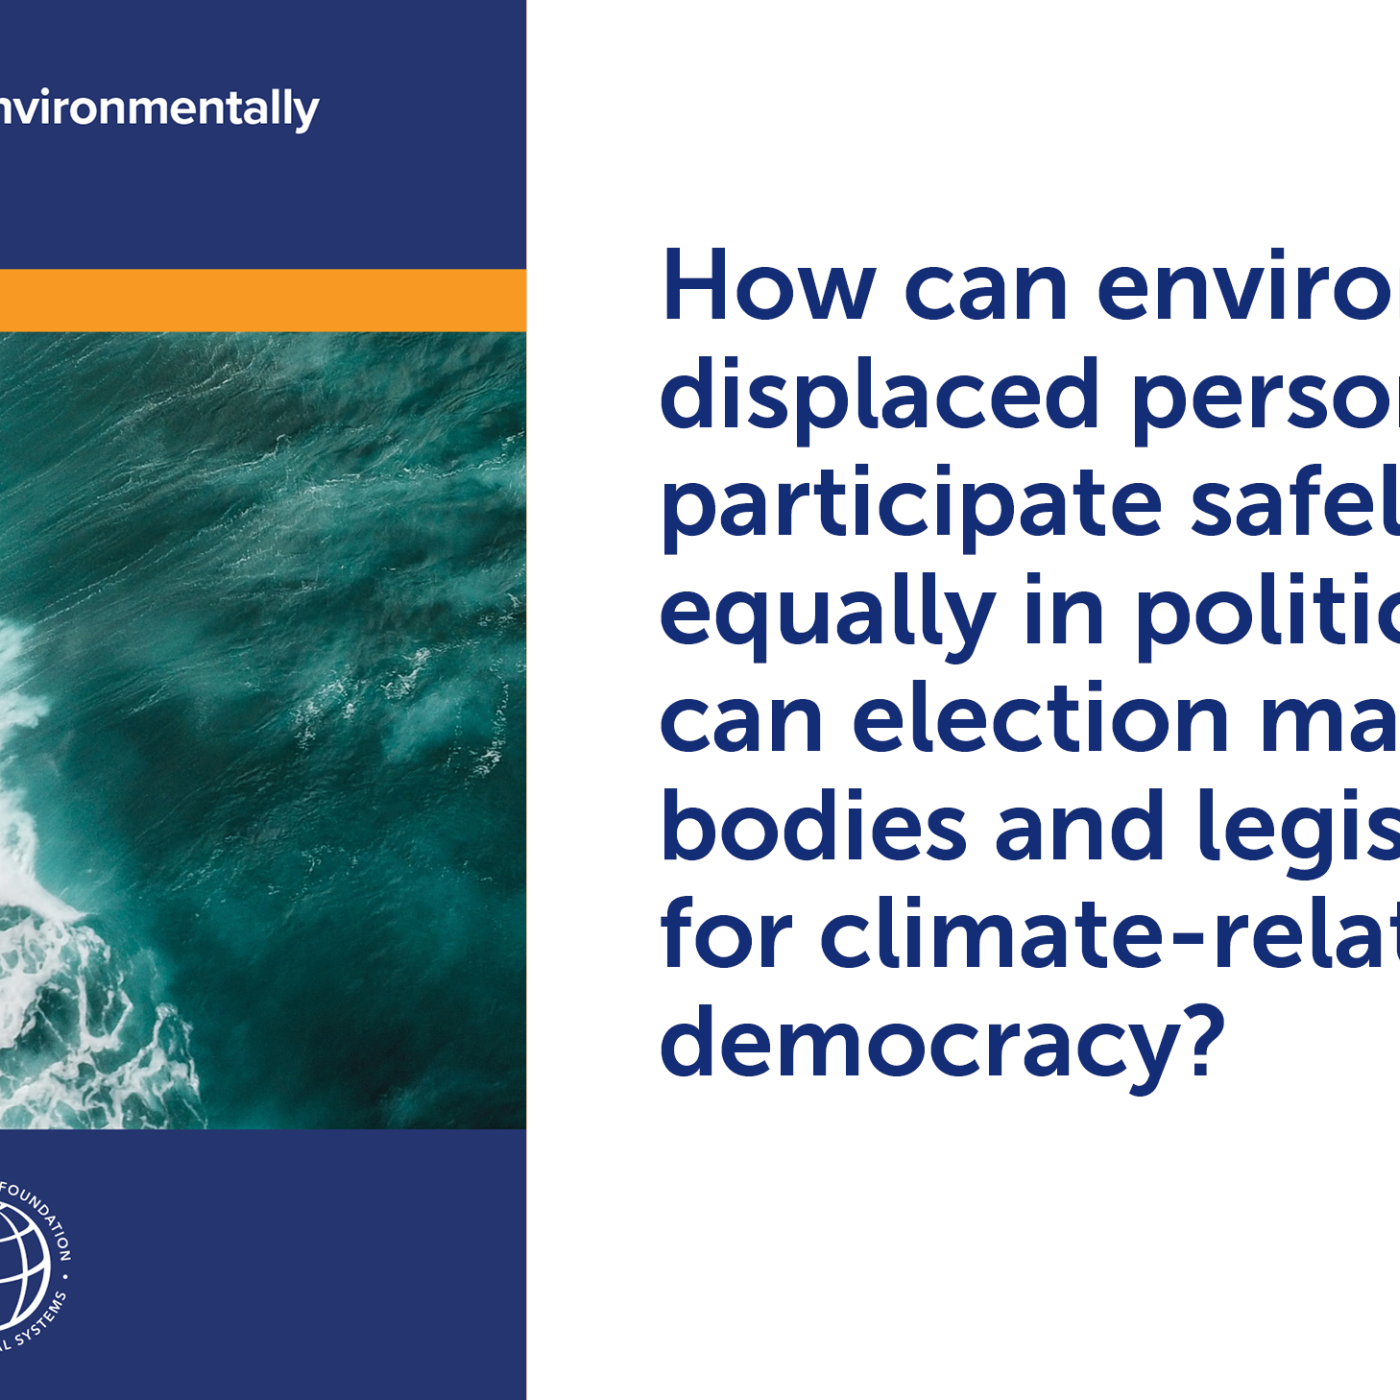 Electoral Rights of Environmentally  Displaced Persons cover + "How can environmentally displaced persons participate safely and equally in political life? How can election management bodies and legislatures plan for climate-related risks to democracy?""